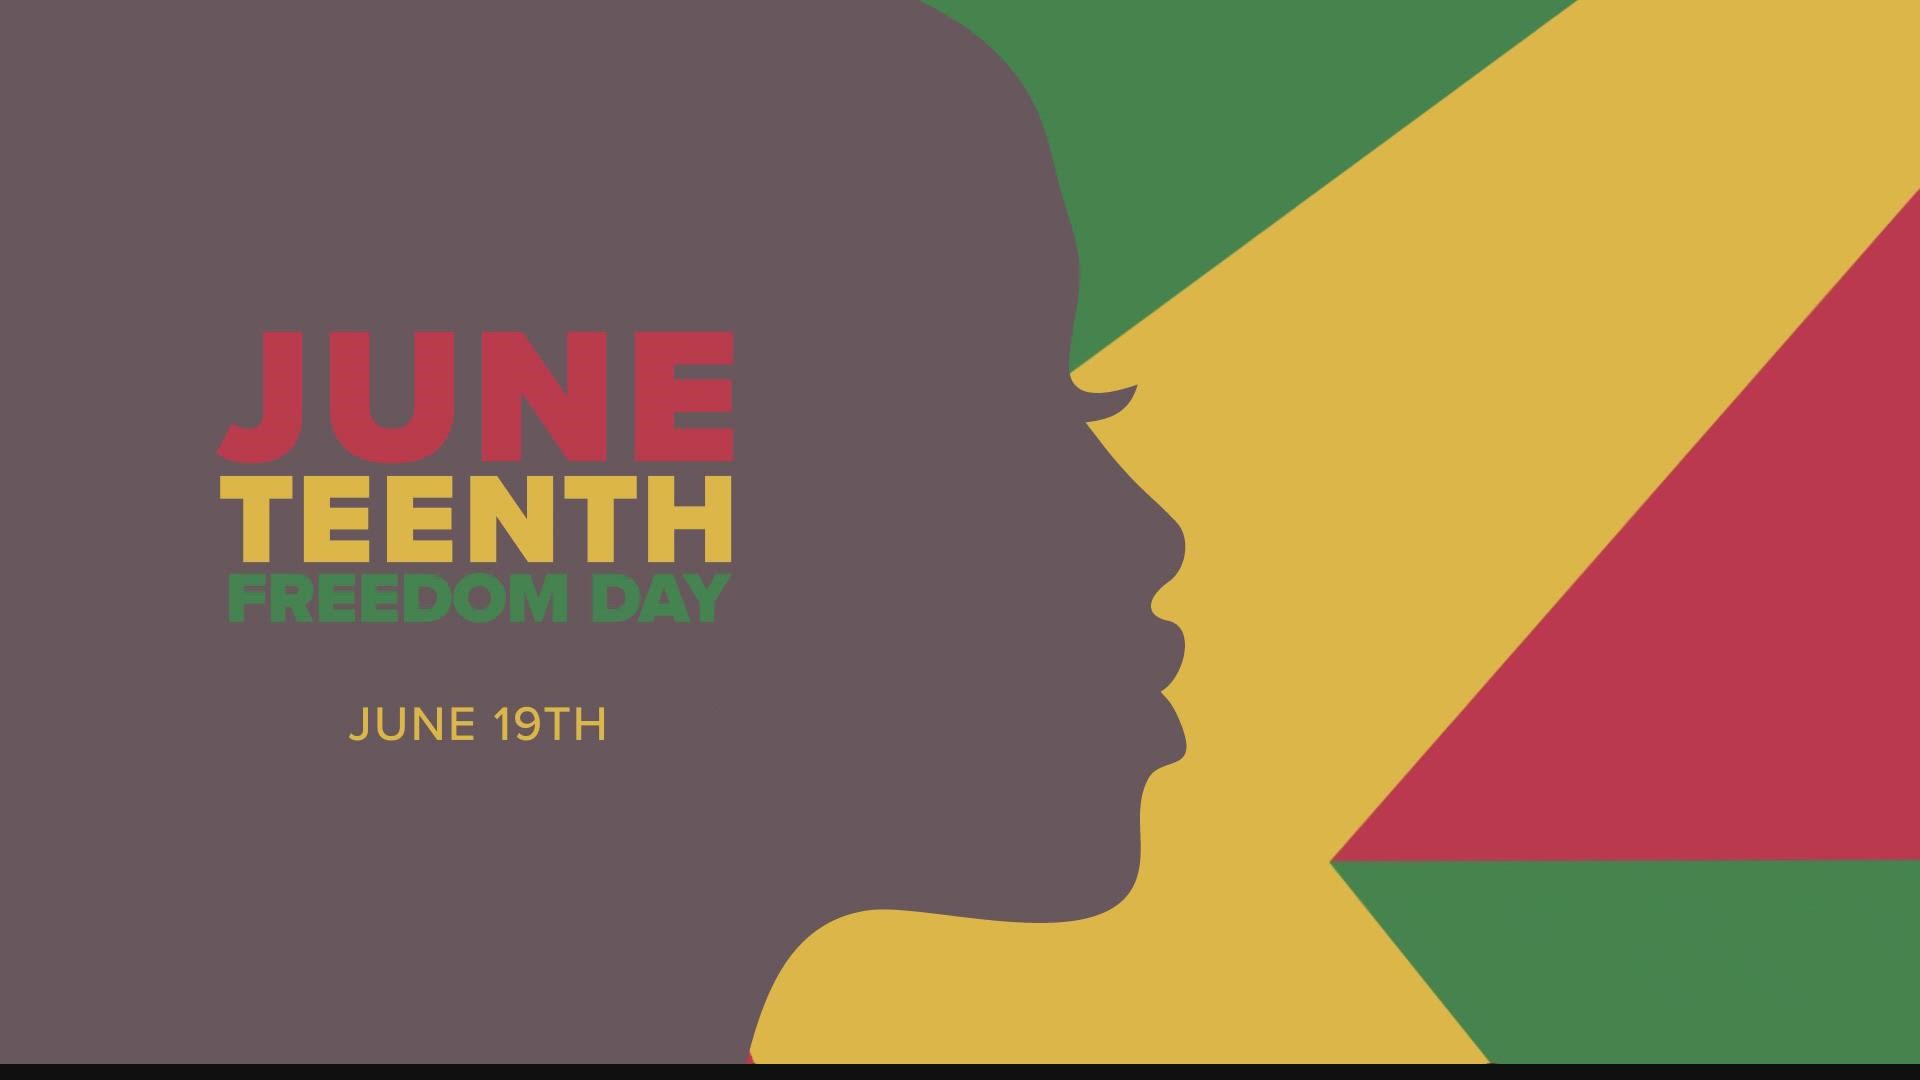 Juneteenth is on Sunday. To mark the day when slavery ended in the U.S., several cities across the state will host Freedom Day celebrations.